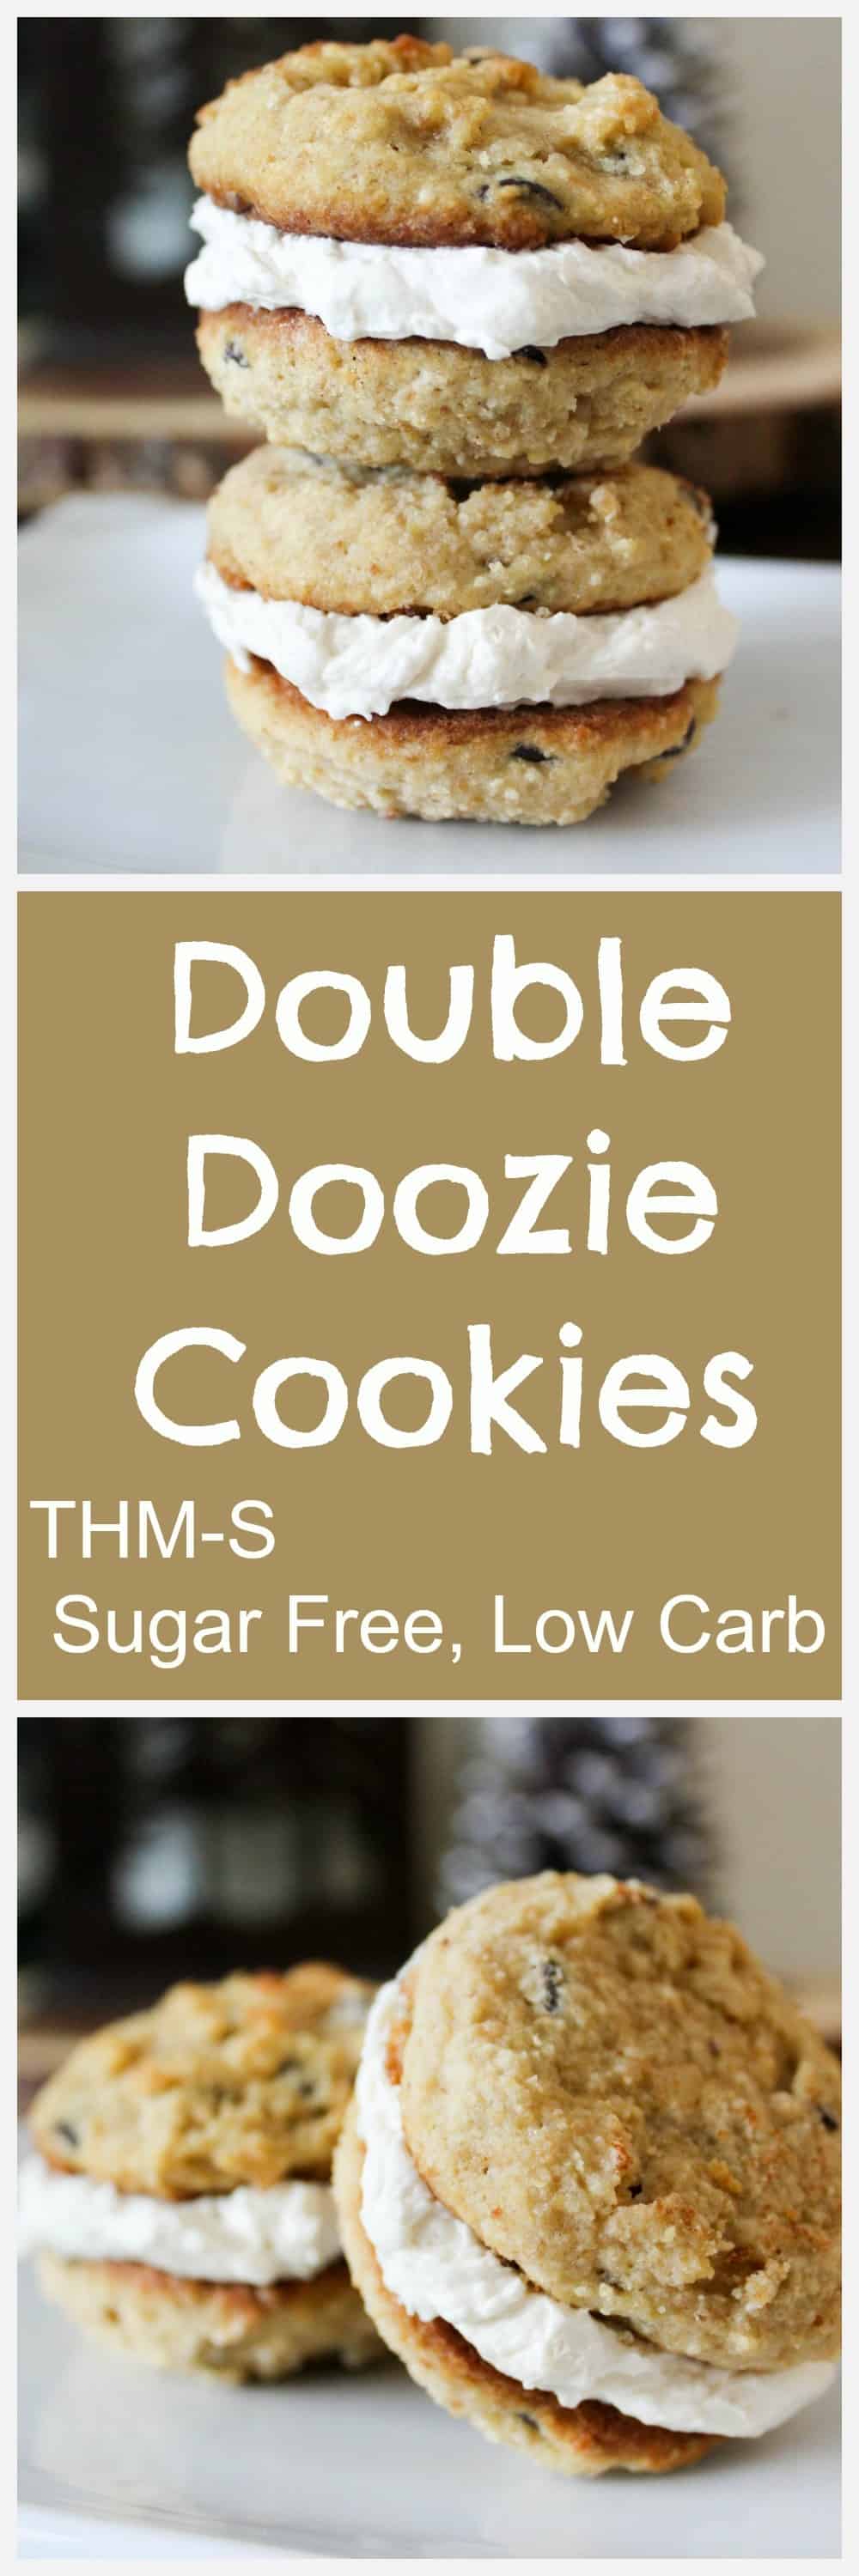 Double Doozie Cookies (THM-S, Sugar Free, Low Carb)